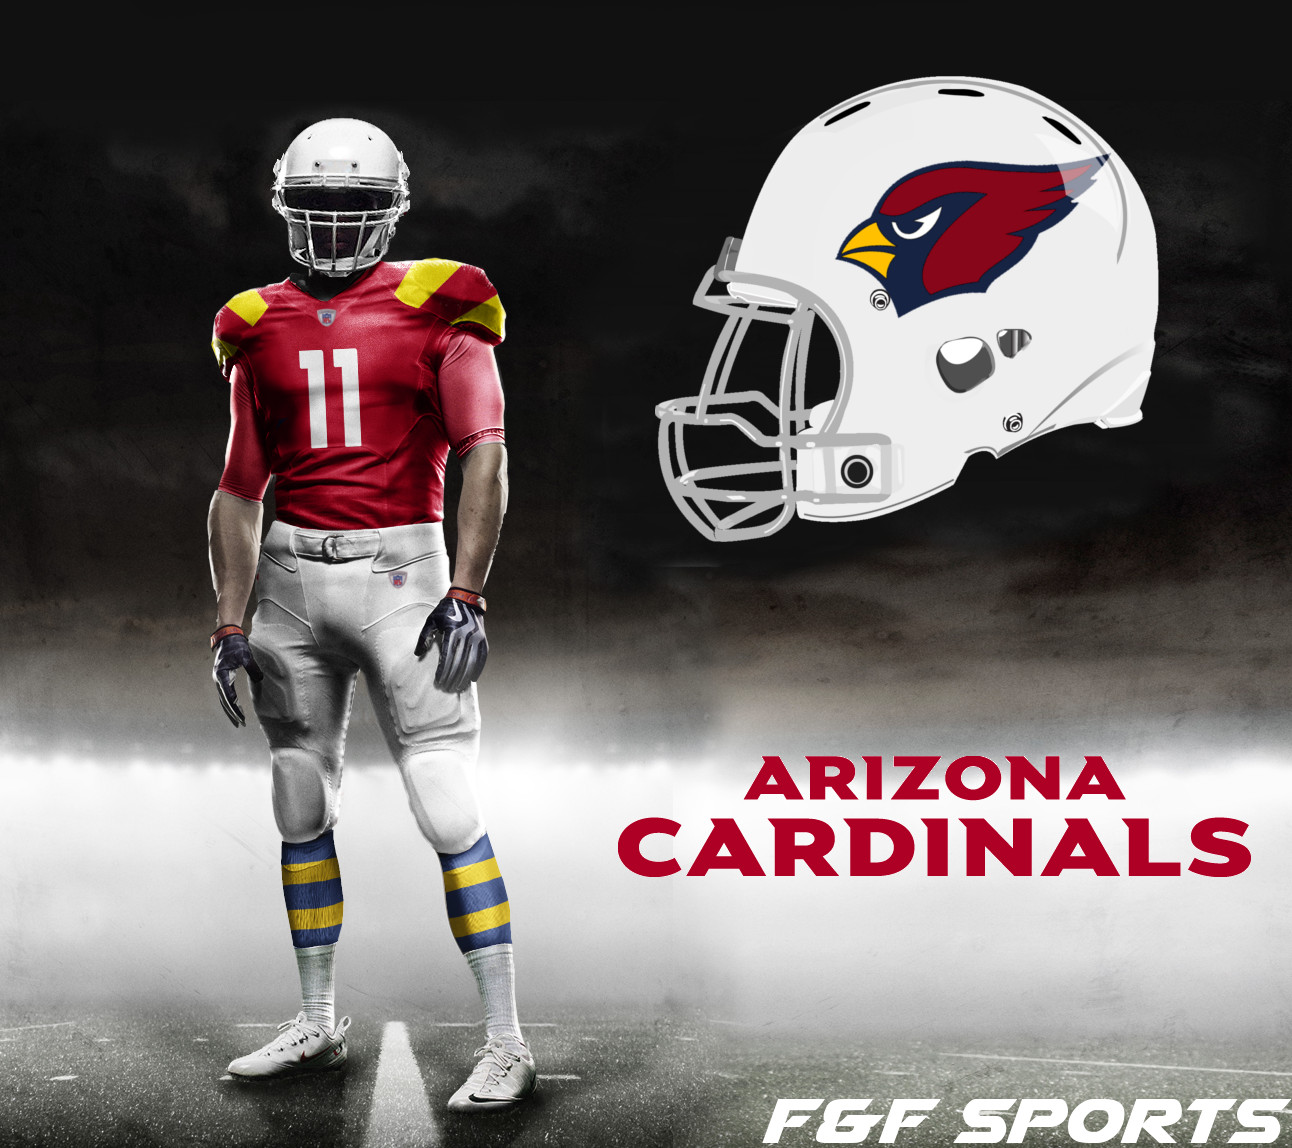 NFL: These Arizona Cardinals Concept Uniforms are Better than the